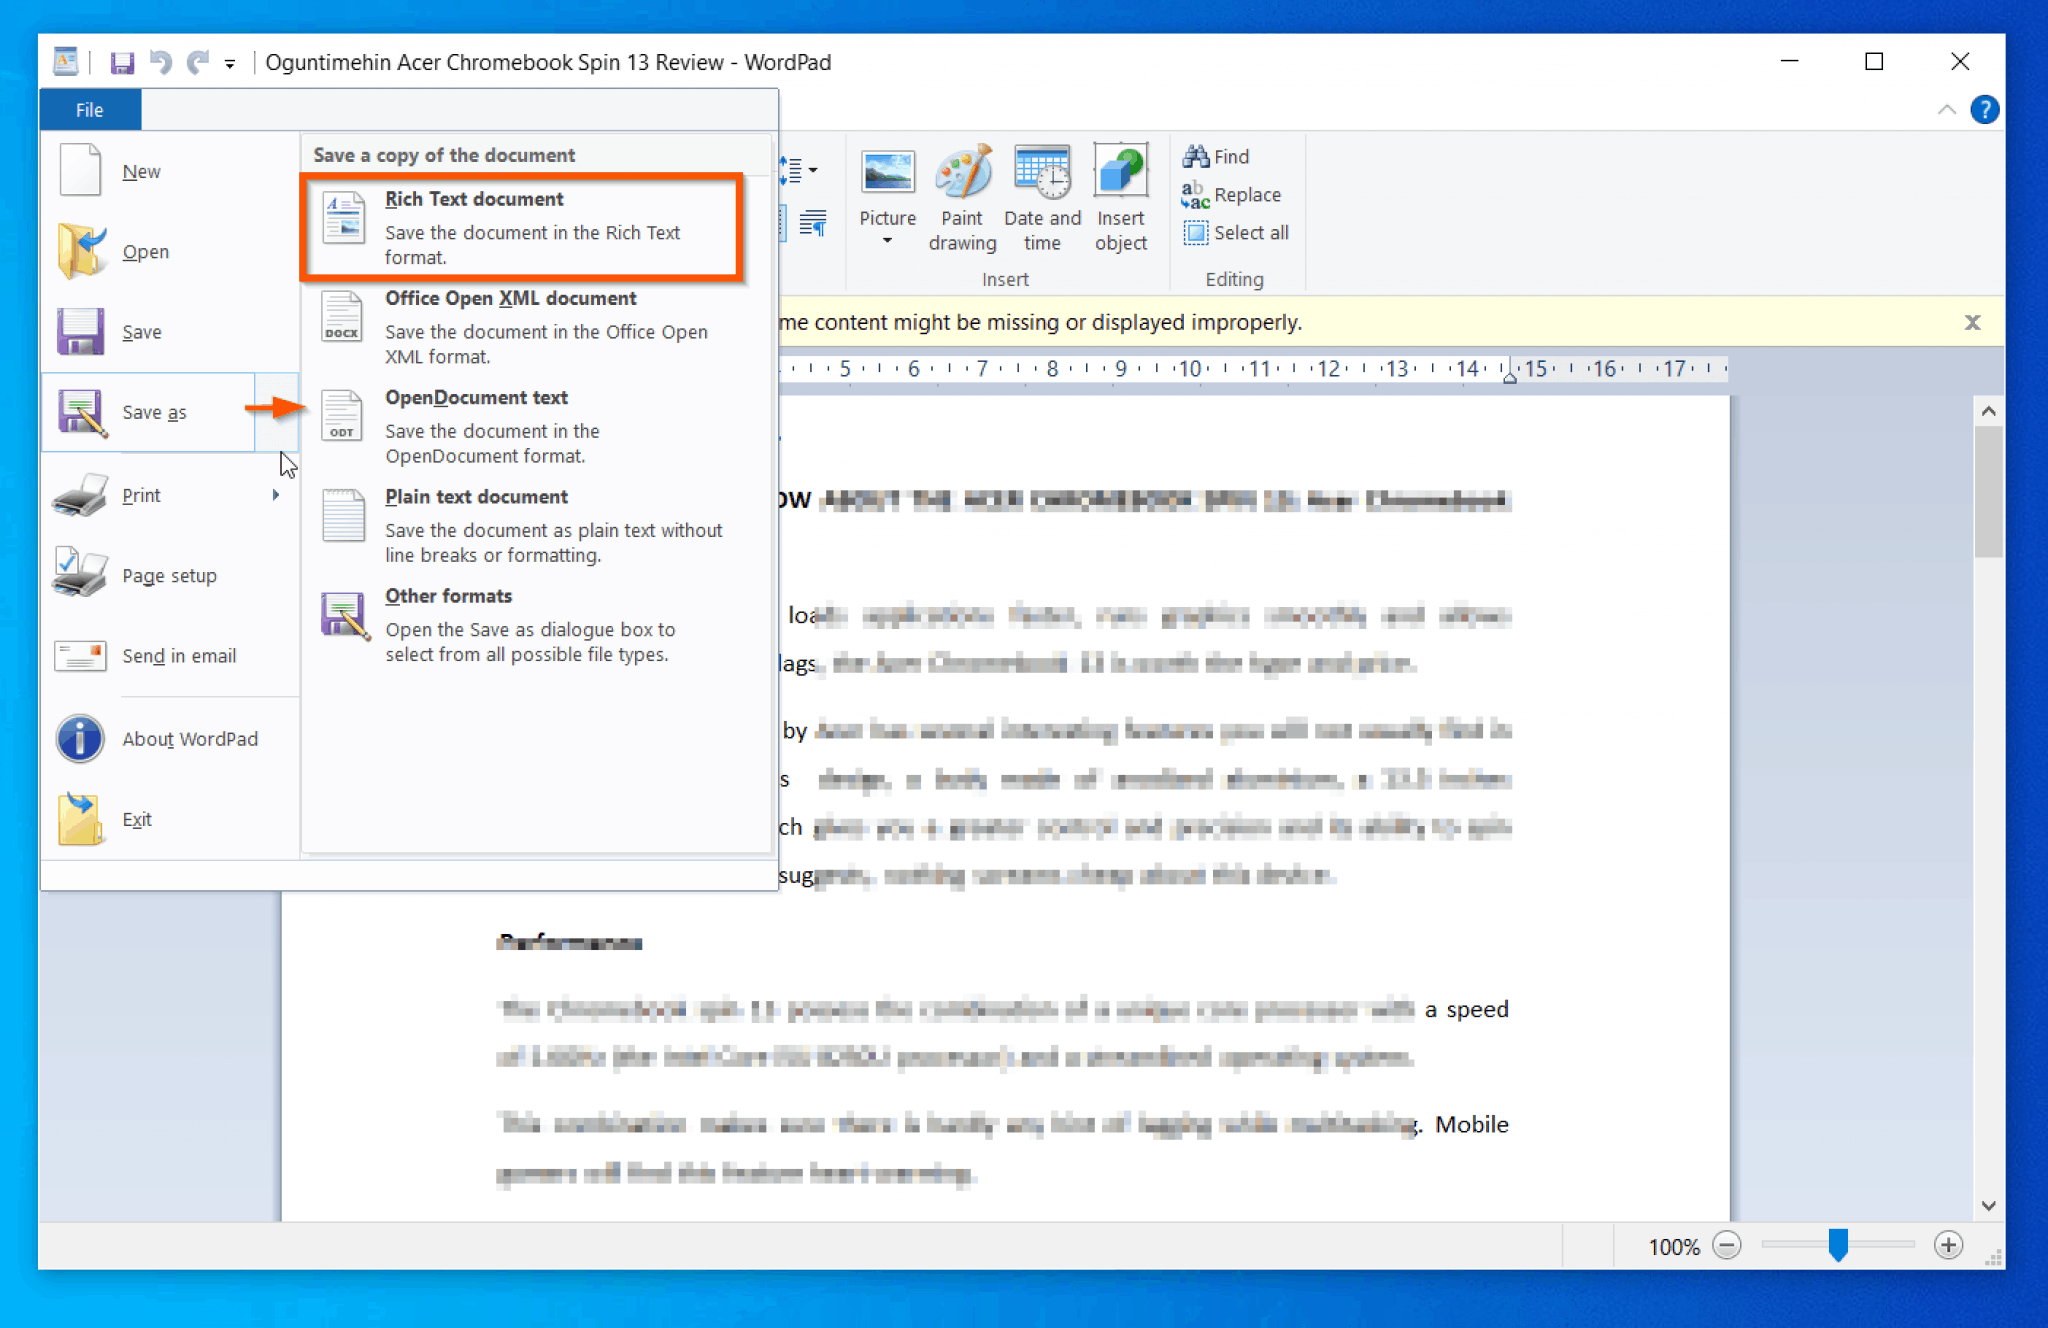 how to use window xp home word pad as document